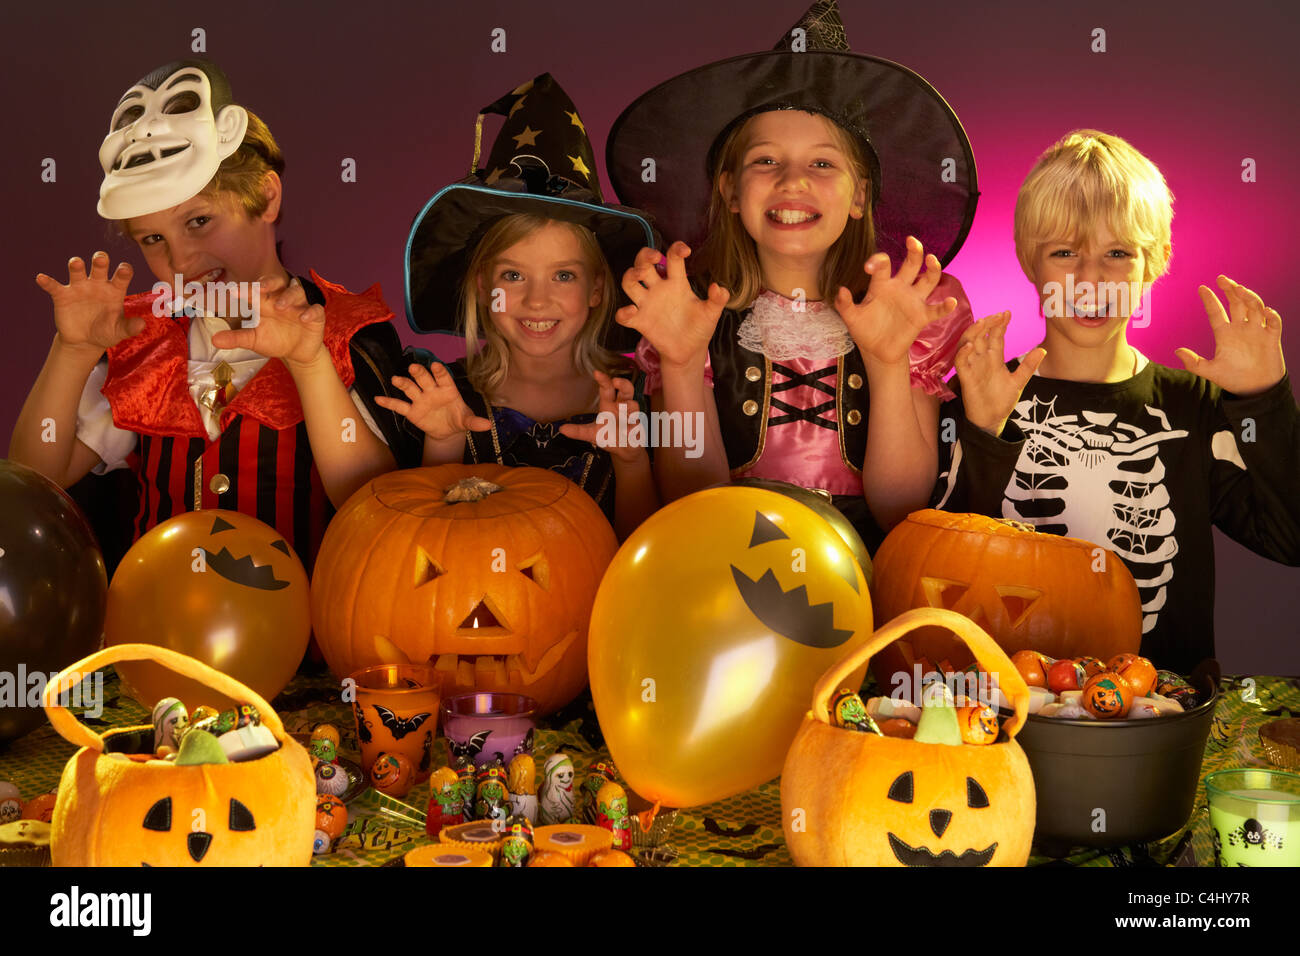 Halloween party with children wearing fancy costumes Stock Photo